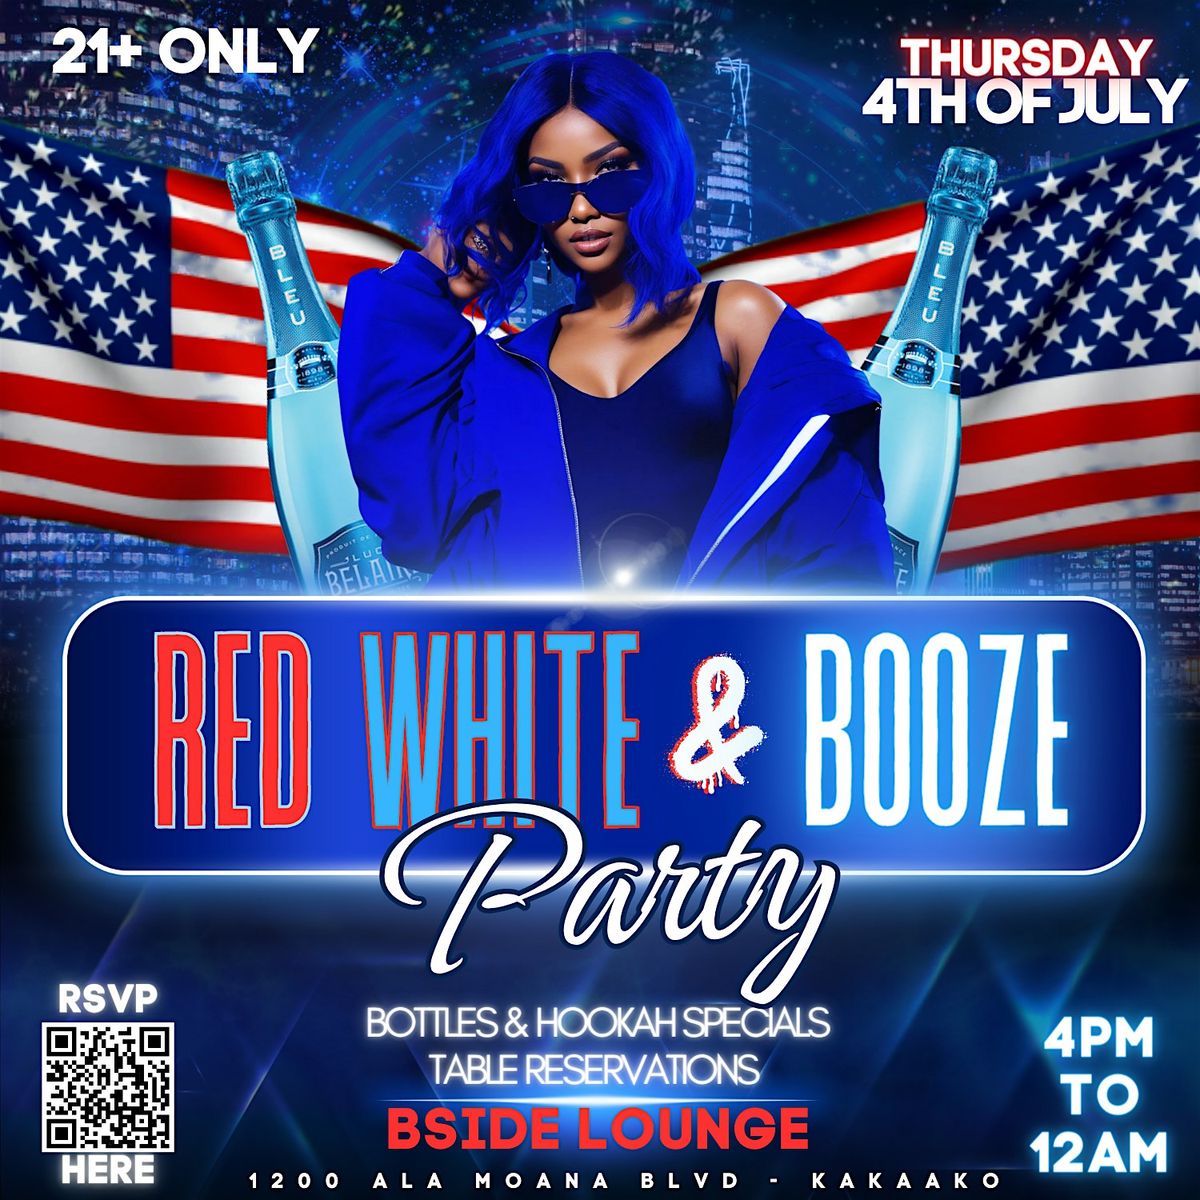 Red, White & BOOZE Party